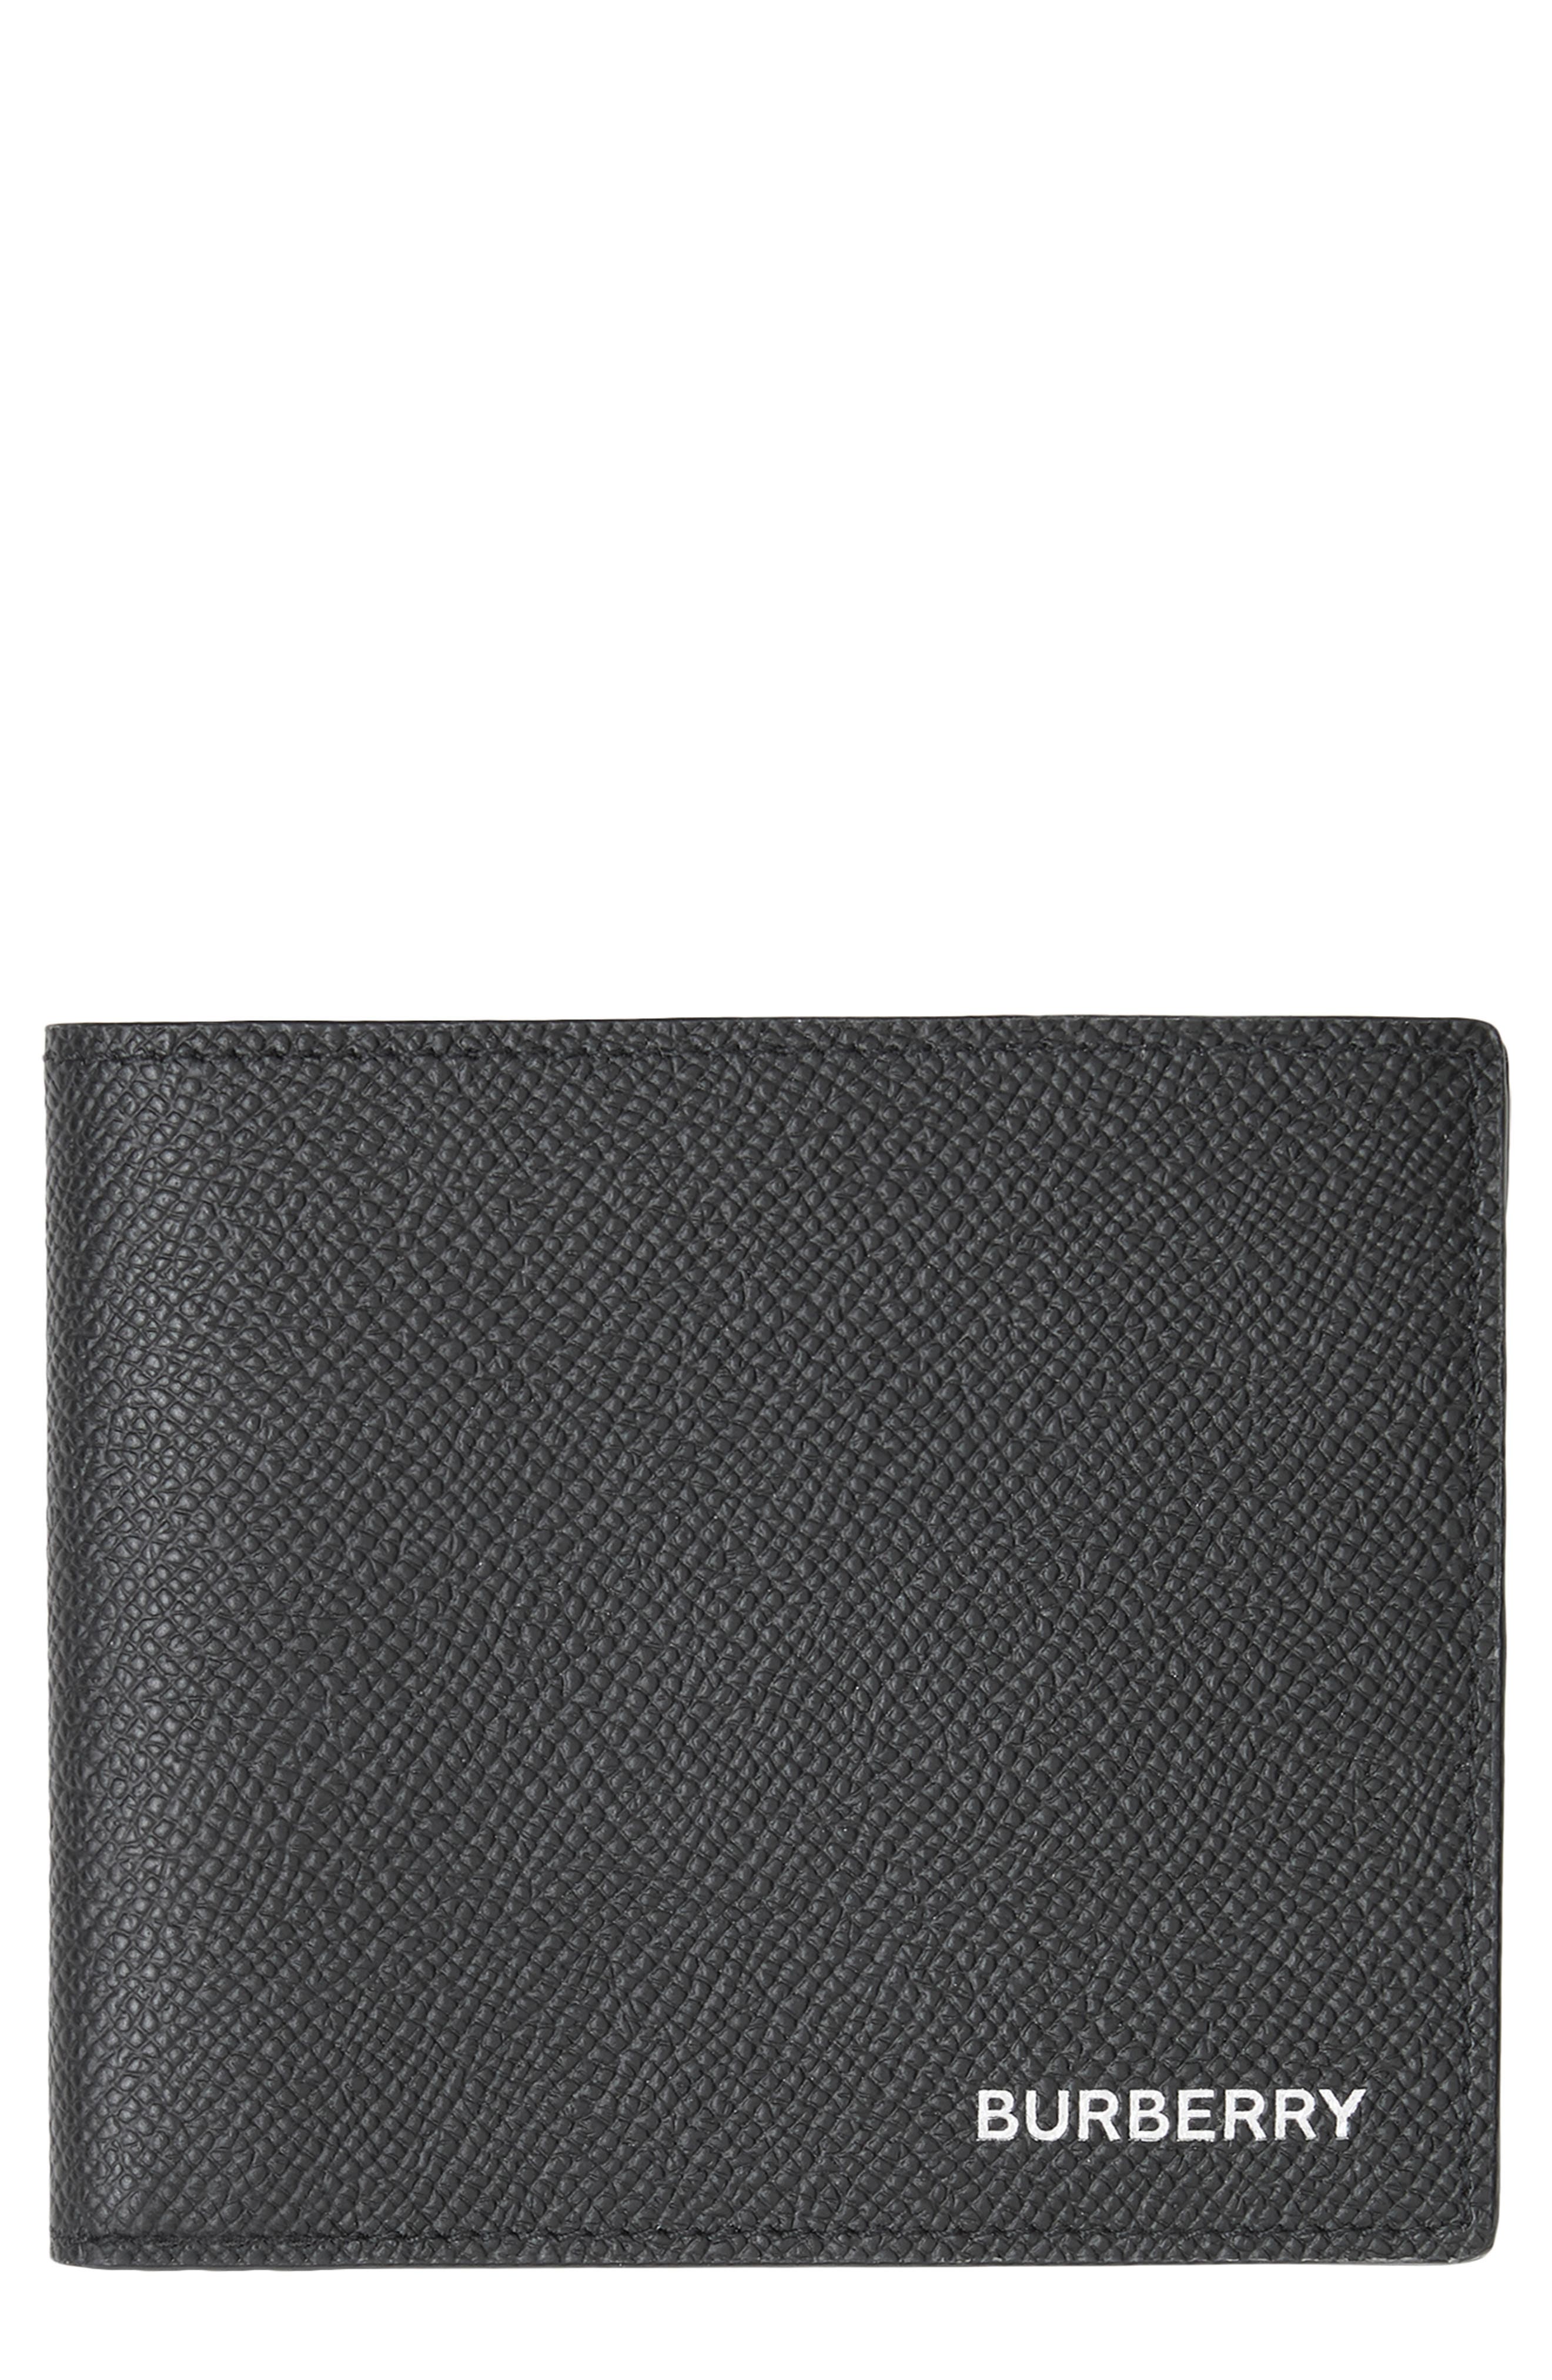 Burberry Leather International Wallet in Black at Nordstrom